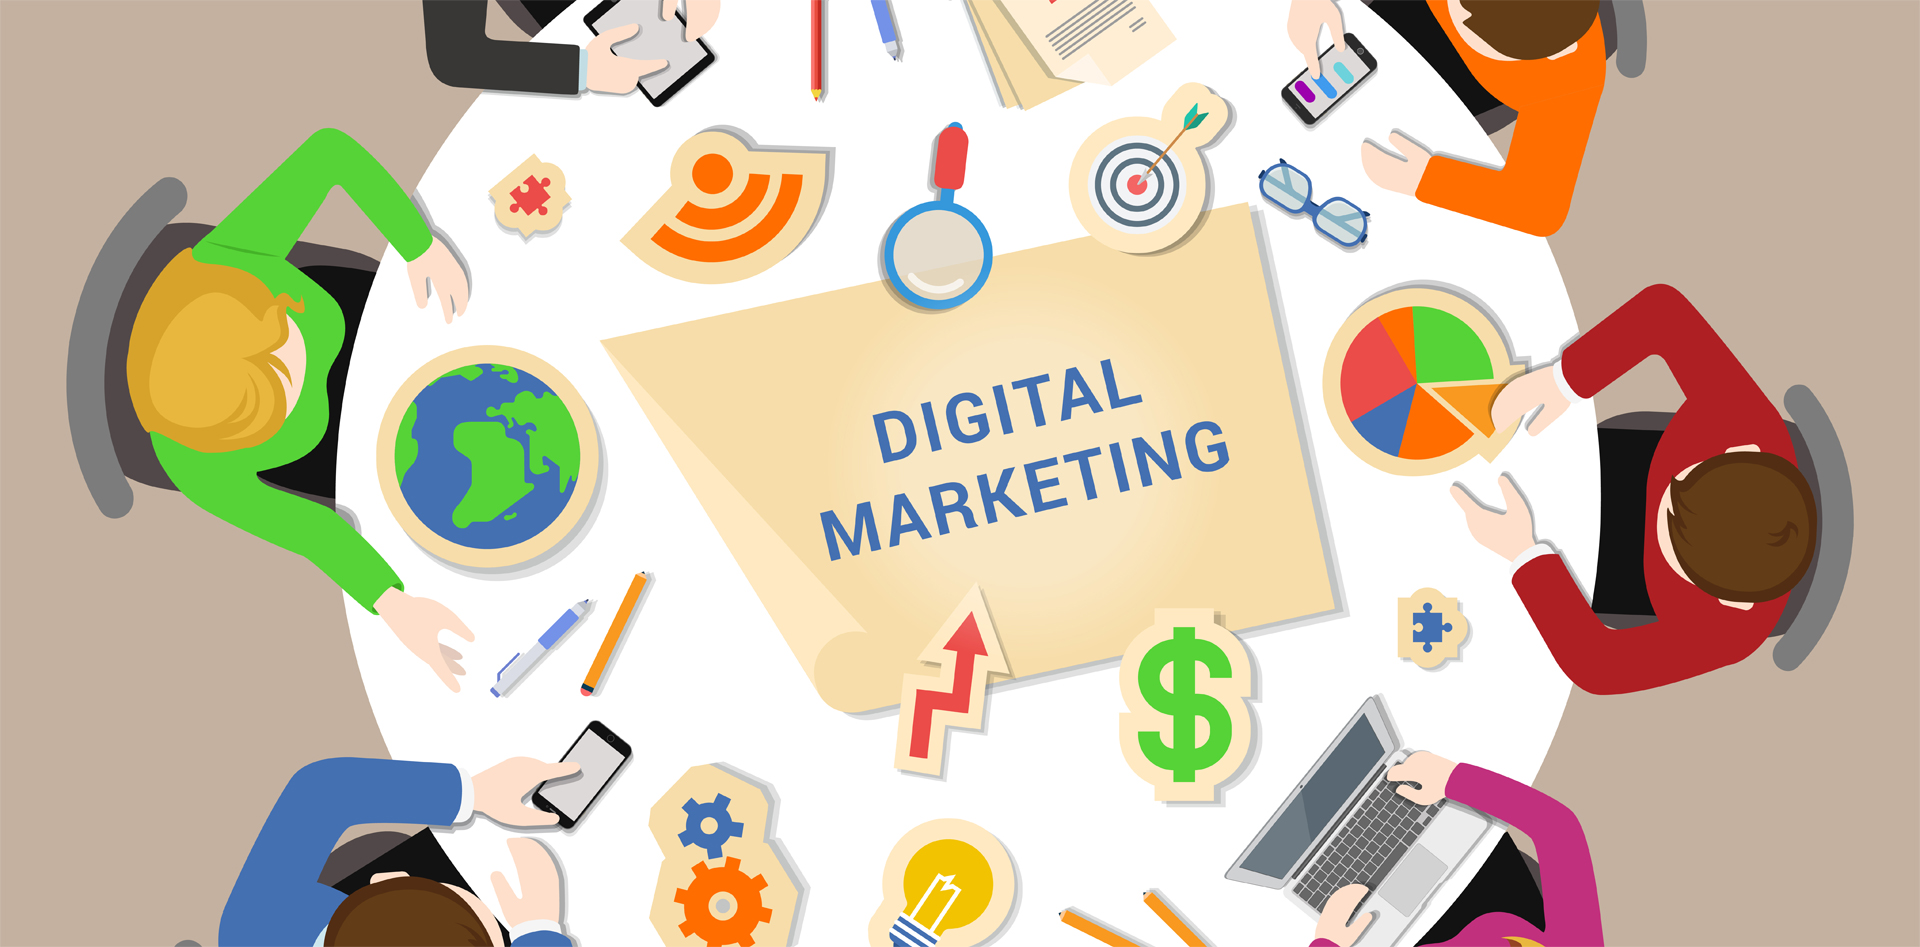 What is the meaning of digital marketing?